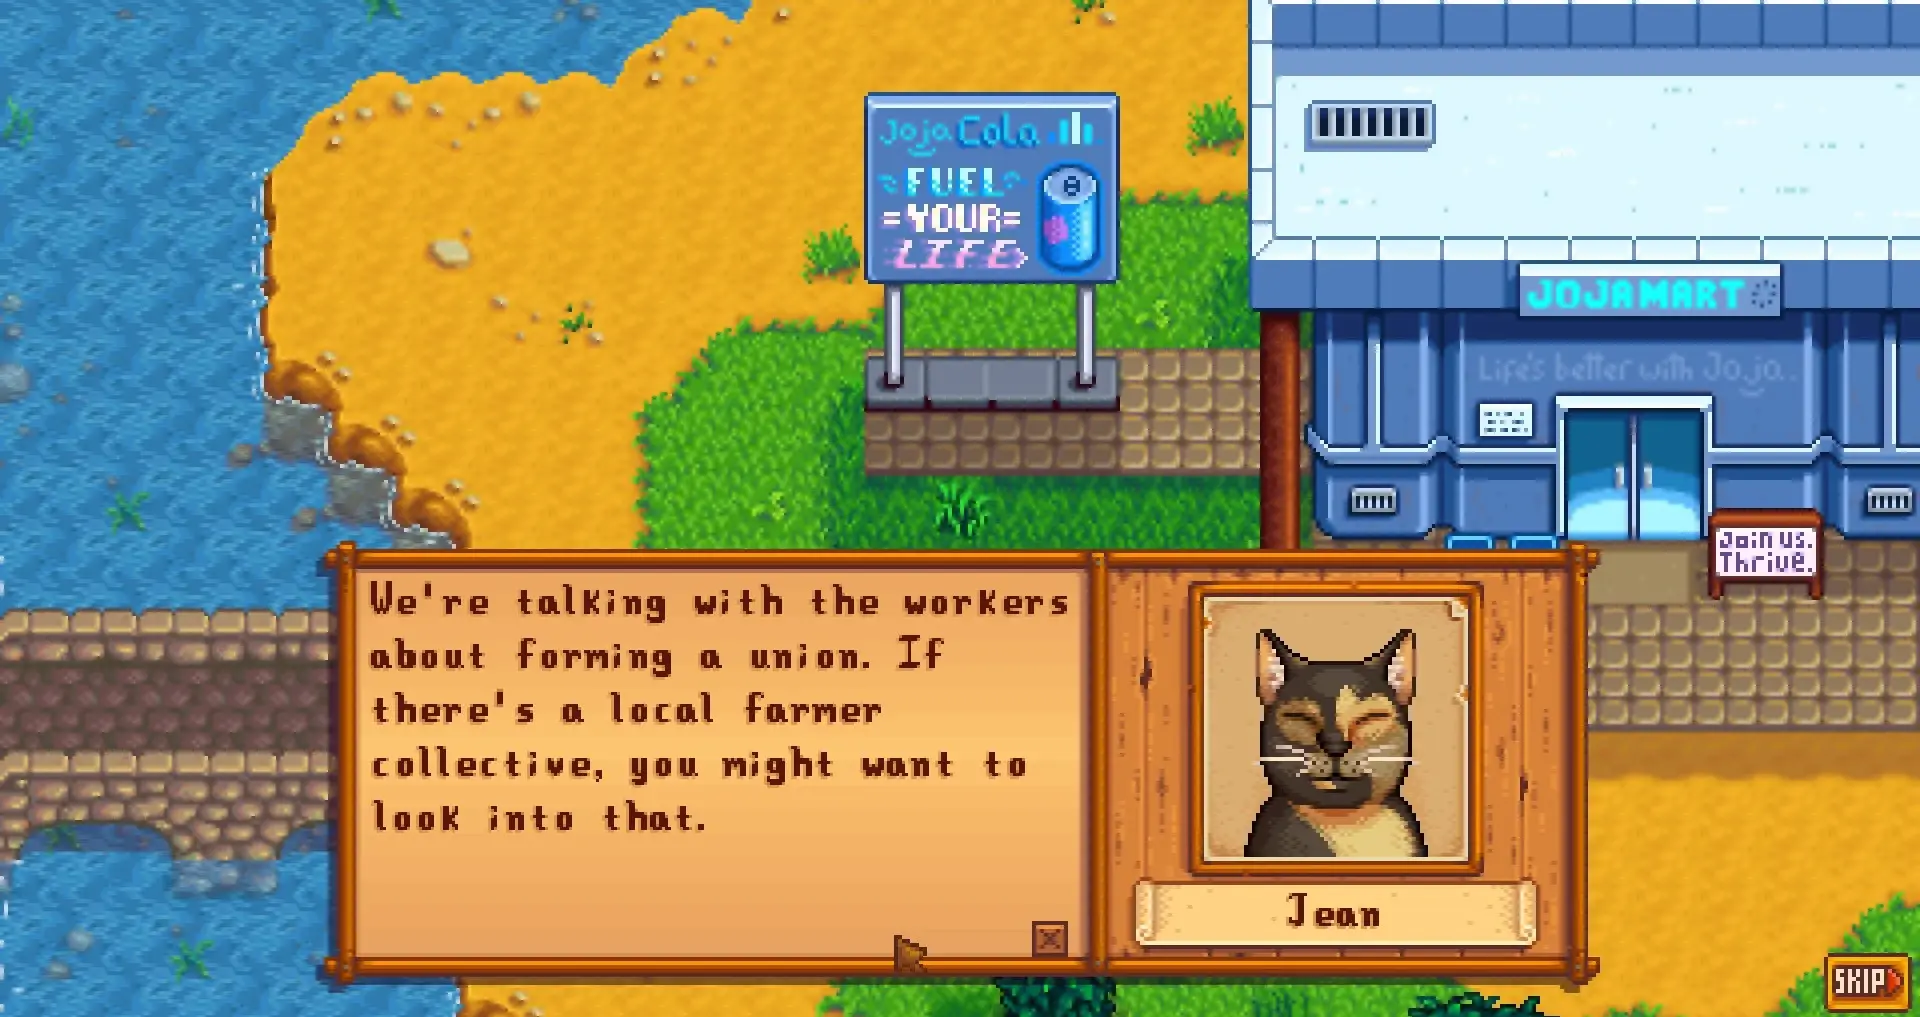 New NPCs Info - Gift Tastes and Heart Events at Stardew Valley Nexus - Mods  and community